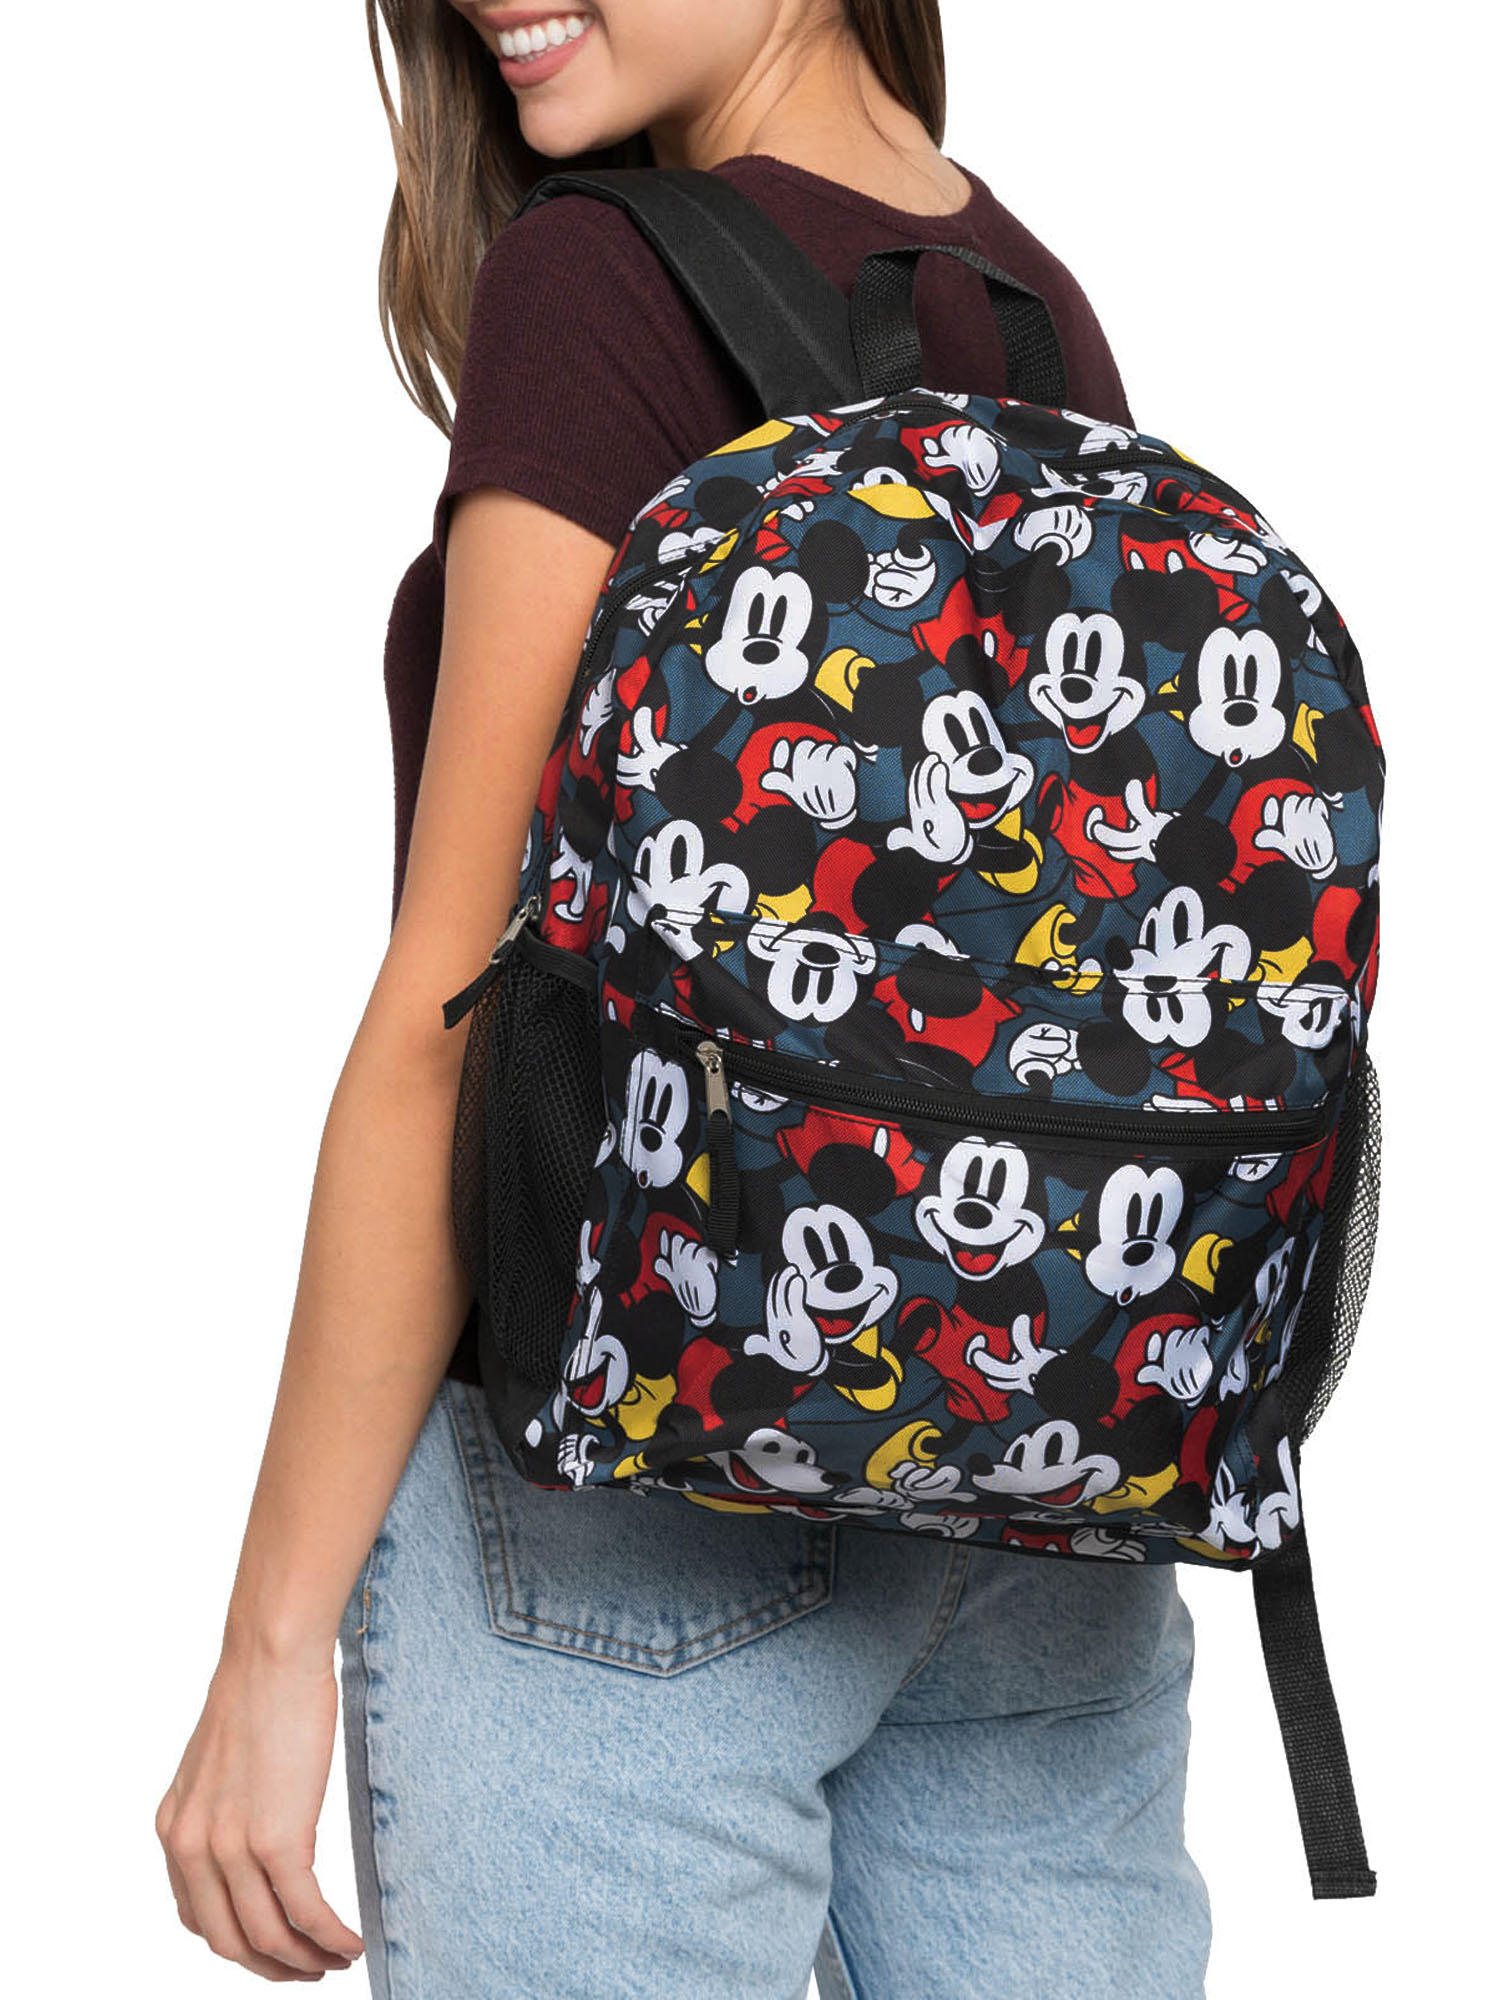 Disney Mickey Mouse Backpack 16" All-over Print Classic Front & Side Pockets - image 4 of 6